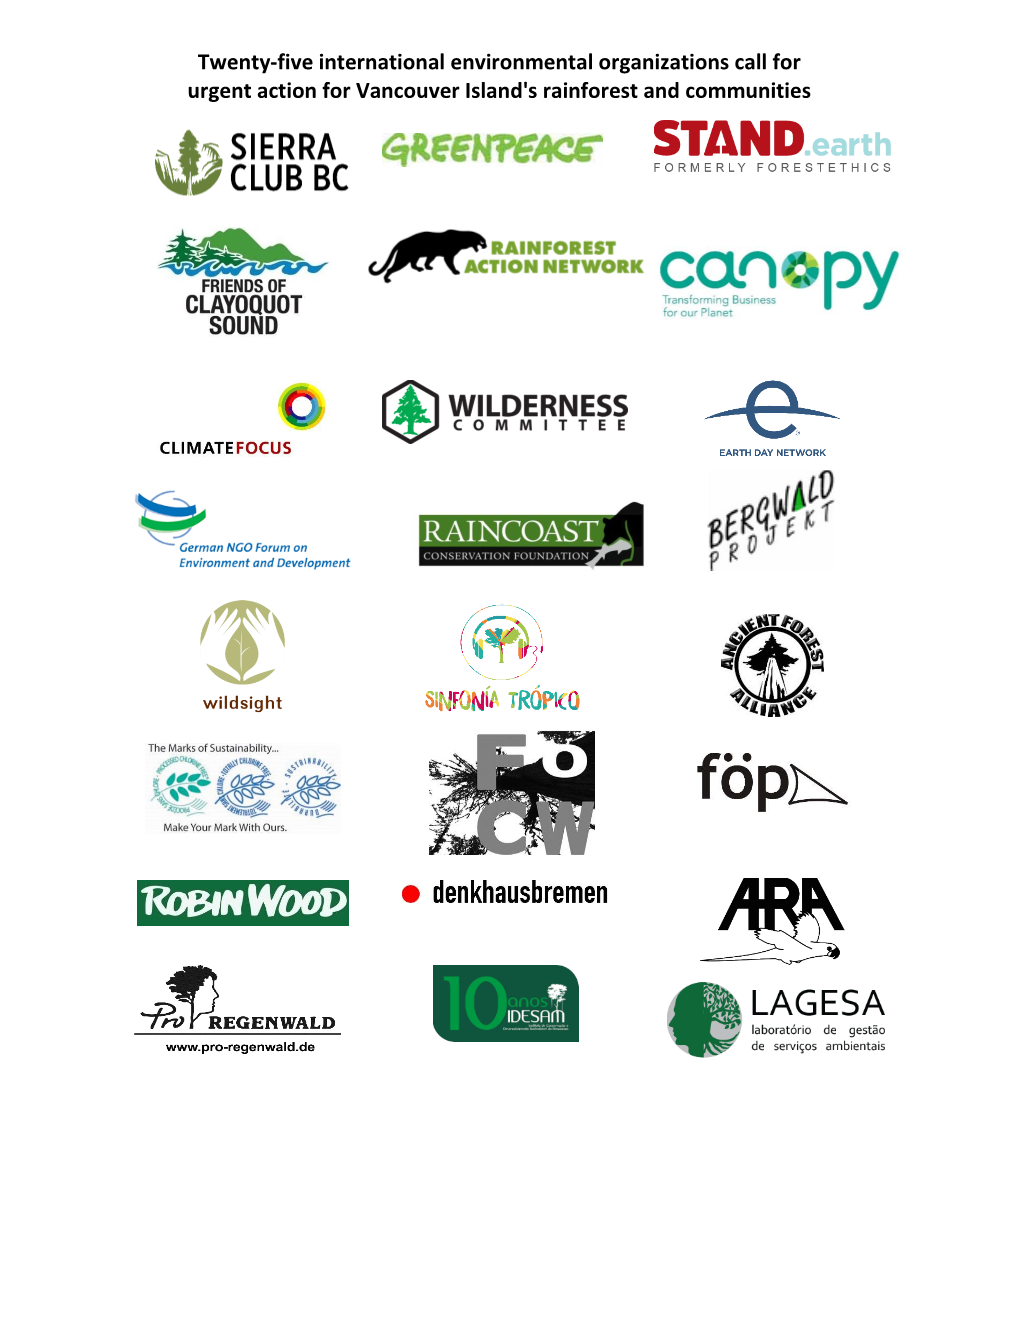 Twenty-Five International Environmental Organizations Call for Urgent Action for Vancouver Island's Rainforest and Communities